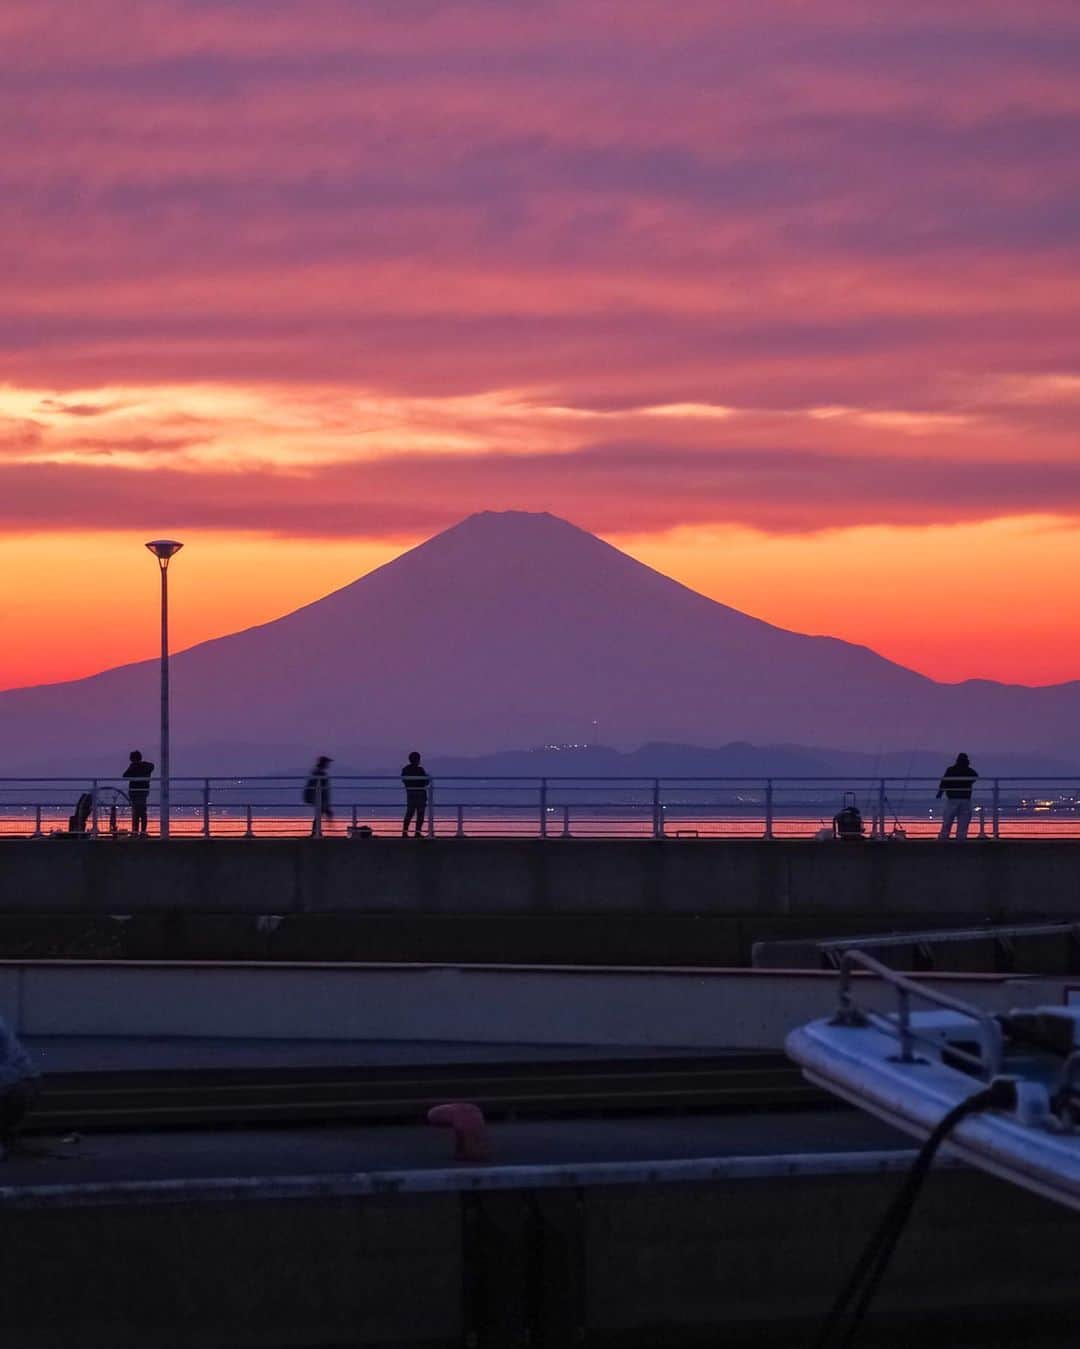 JALのインスタグラム：「. 富士山の絶景スポット 神奈川県 #片瀬漁港 紅く染まる夕暮れ時の穏やかな時間🌆 #FreshAirJuly . . Photo by @miki.k0328 Post your memories with #FlyJAL  #JapanAirlines #JAL #travel #富士山 #片瀬江ノ島駅 #藤沢市 #夕日 #夕焼け #夕焼けハンター #夕暮れ #黄昏 #癒し #漁港 #絶景 #絶景スポット #日本 #日本の絶景 #国内旅行 #旅行 #日本航空」